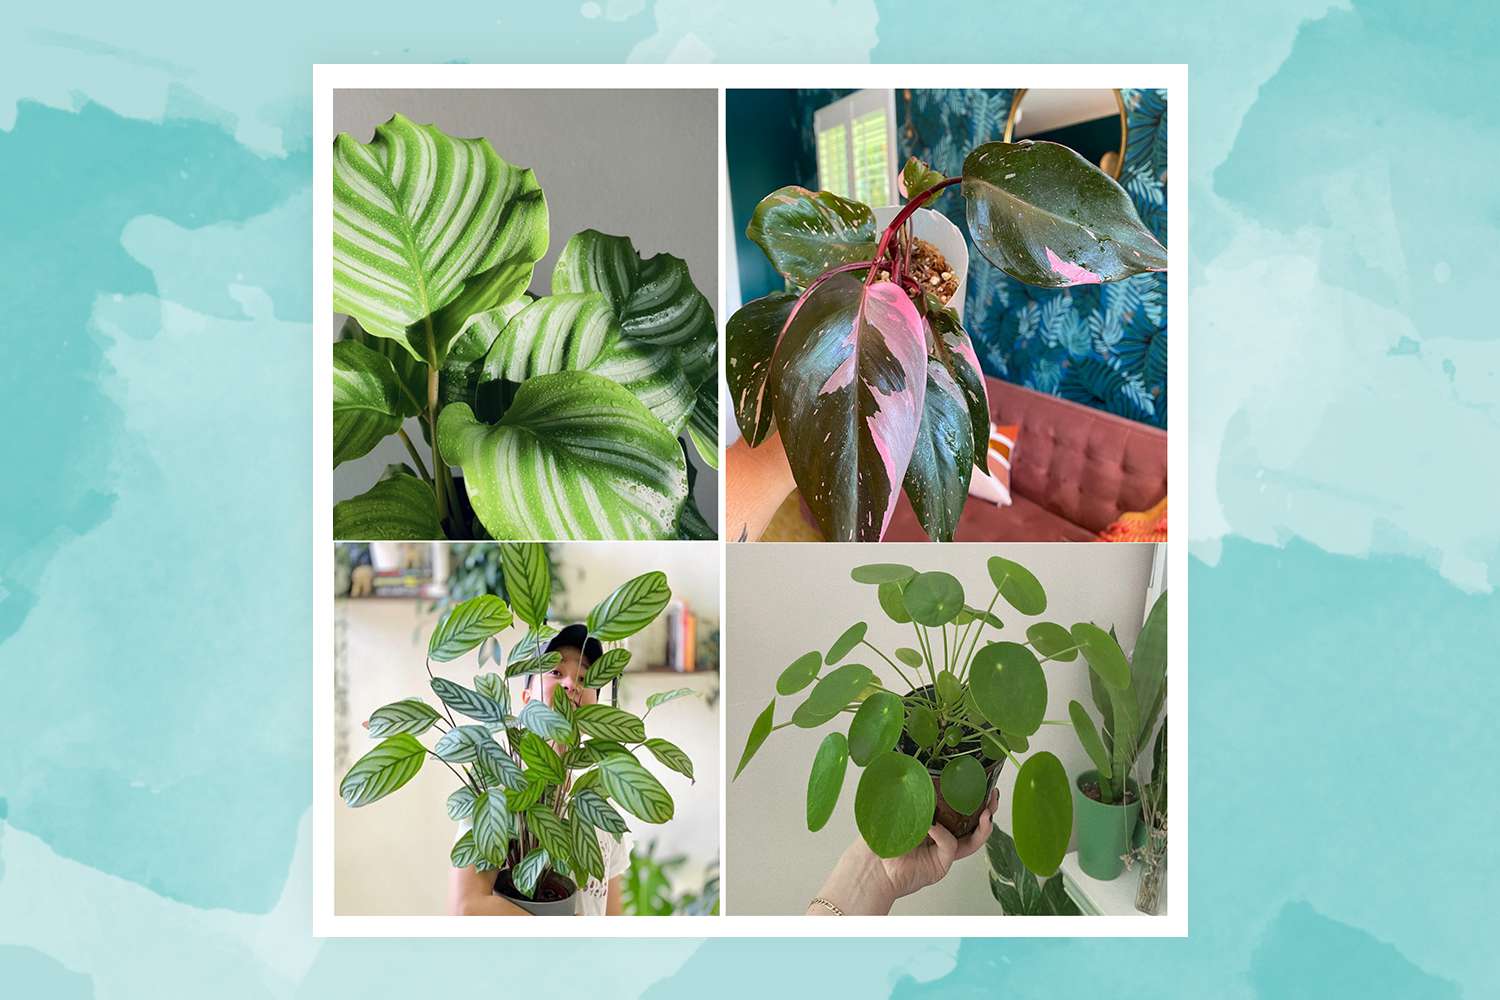 plants these four plant influencers struggle to keep alive include calatheas, pink philodendron princesses, and pileas